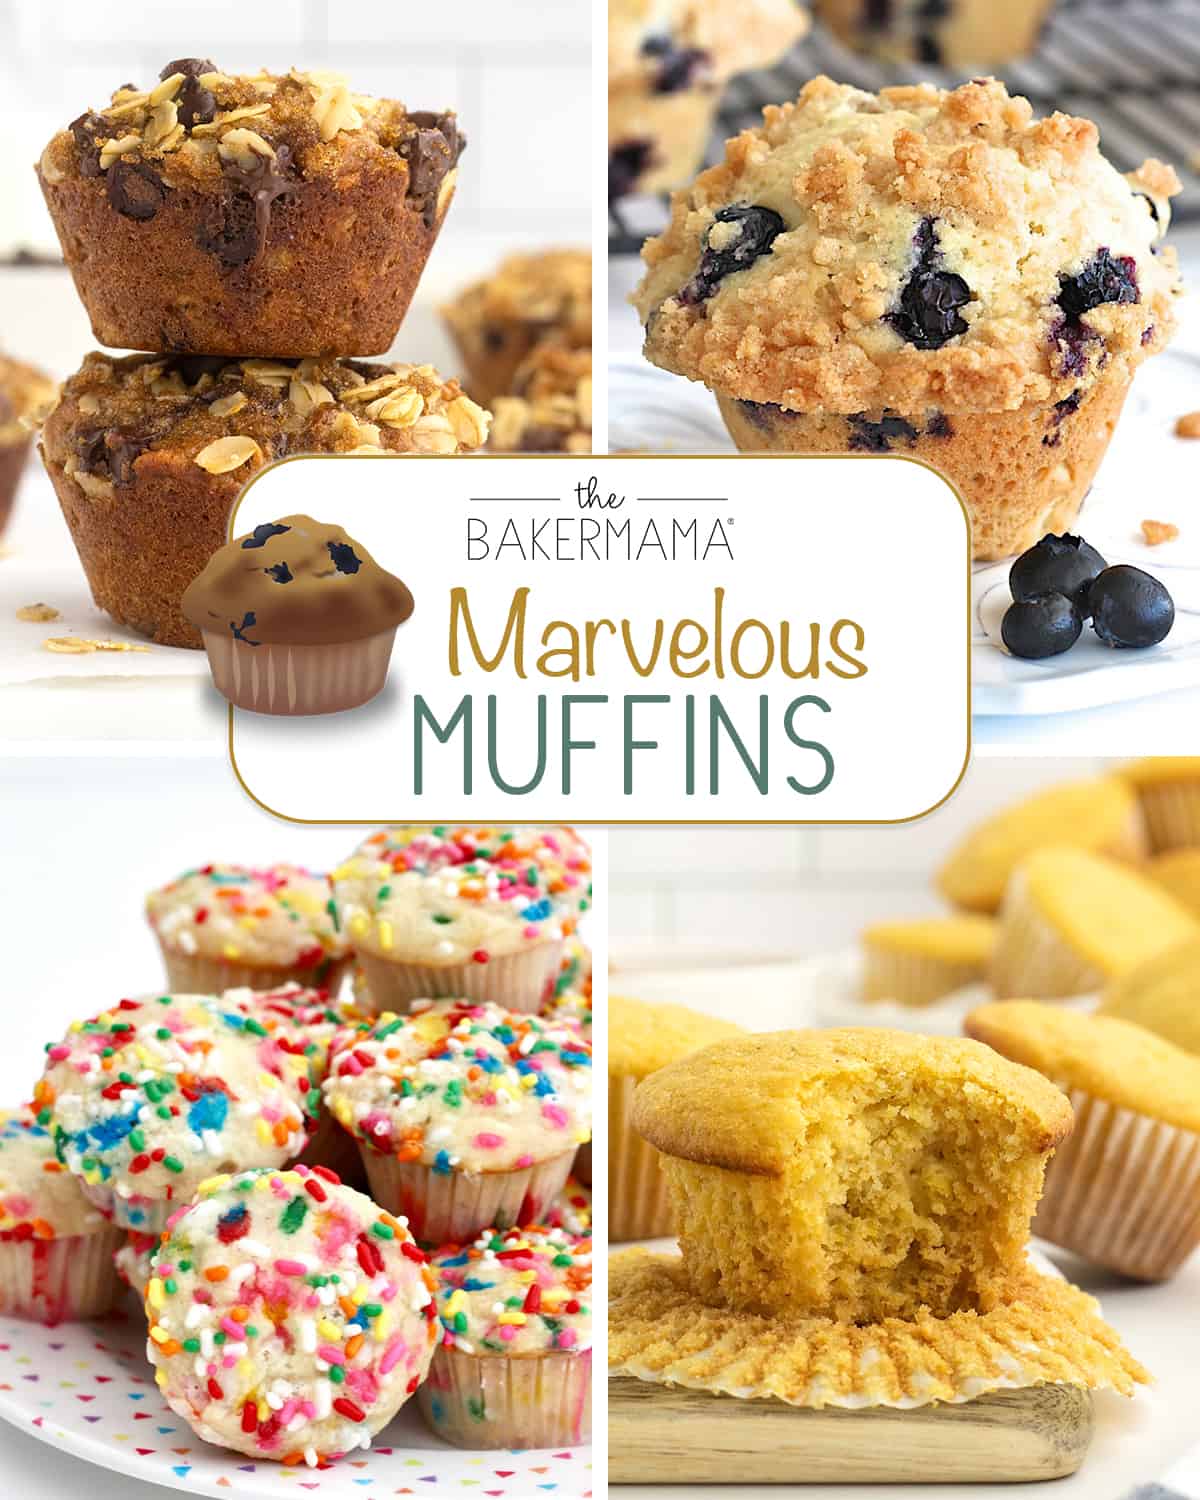 Marvelous Muffins by The BakerMama